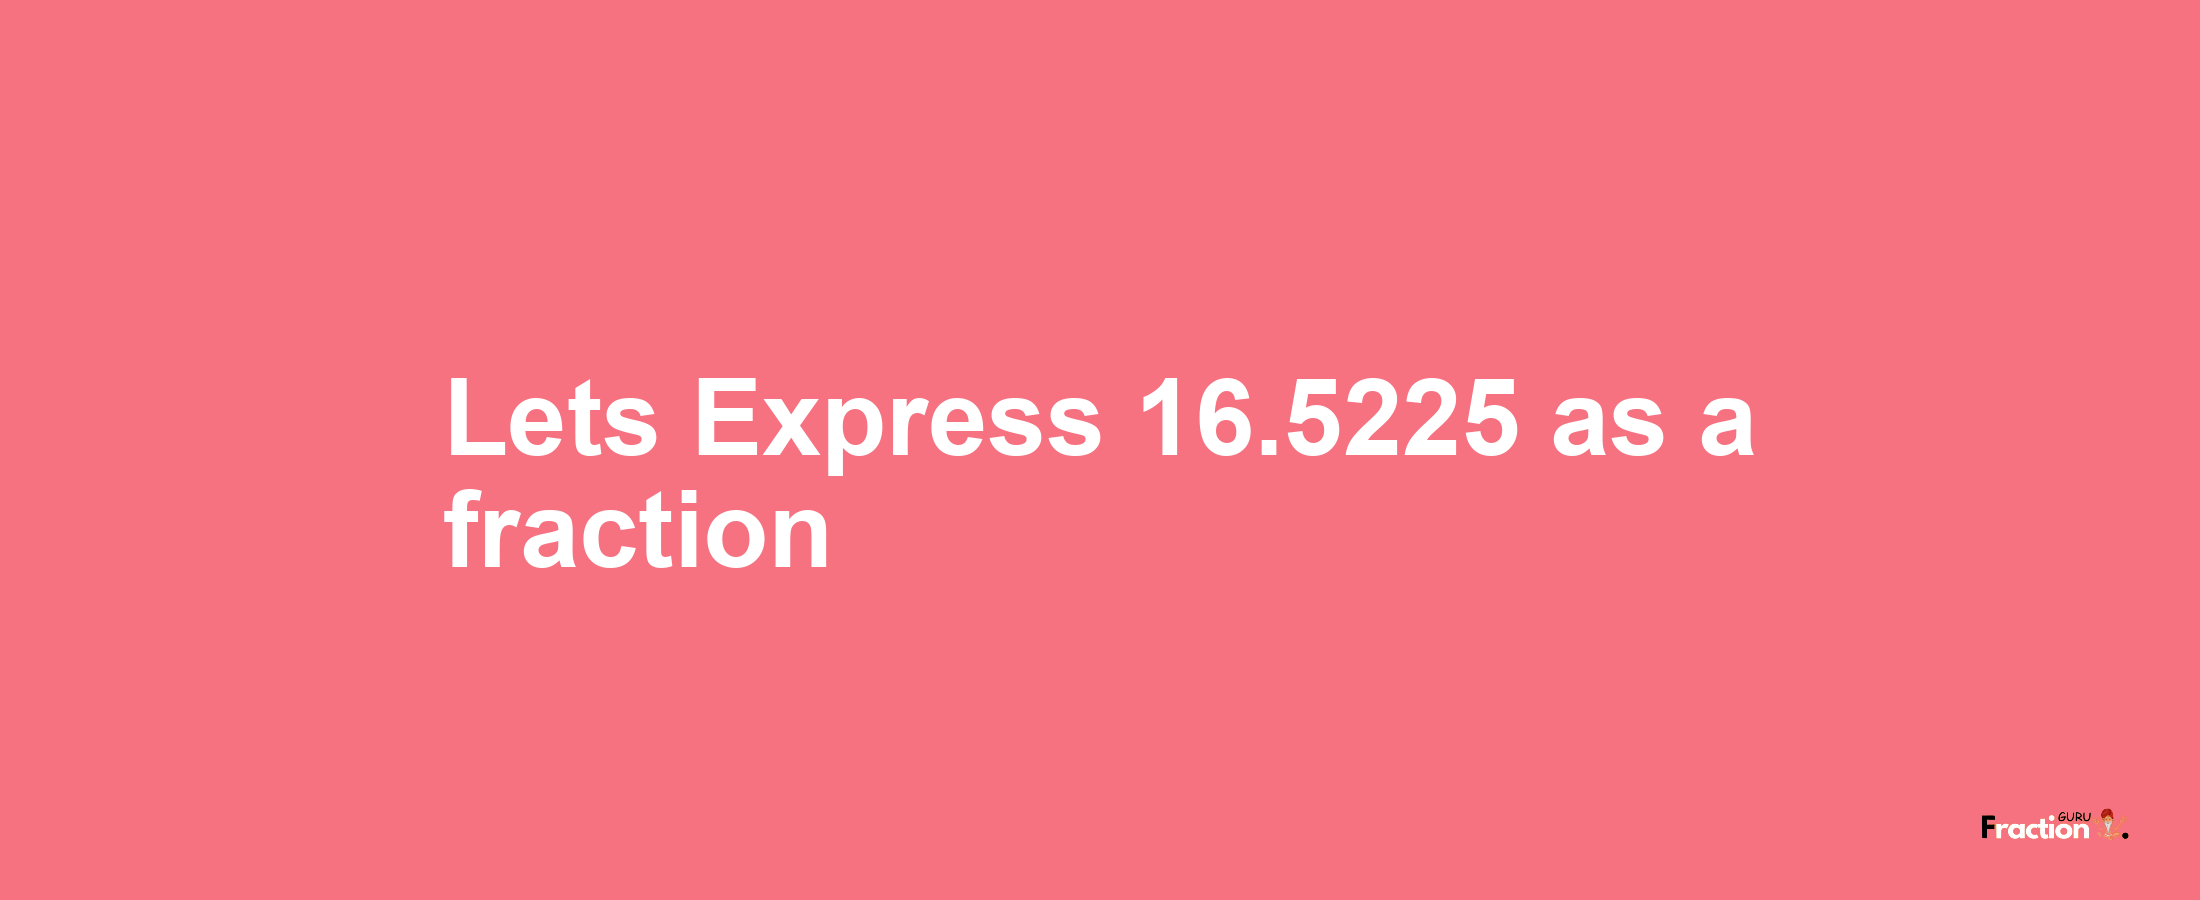 Lets Express 16.5225 as afraction